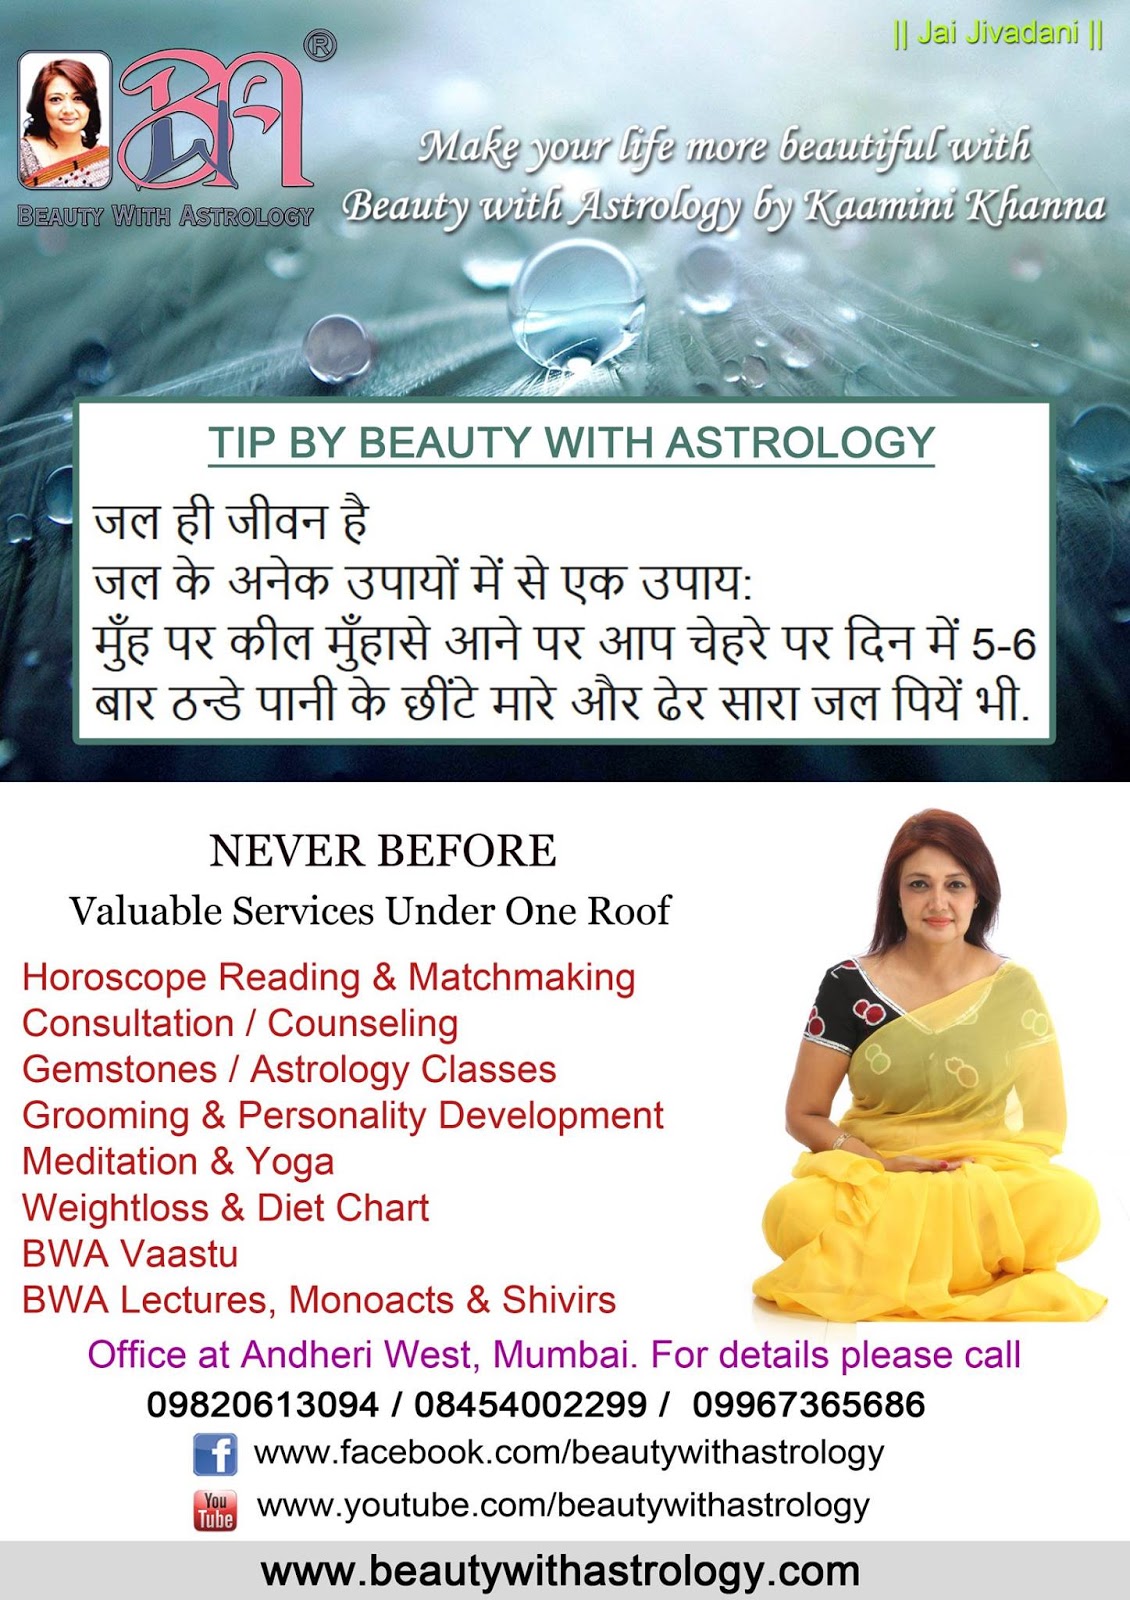 Beauty With Astrology Diet Chart